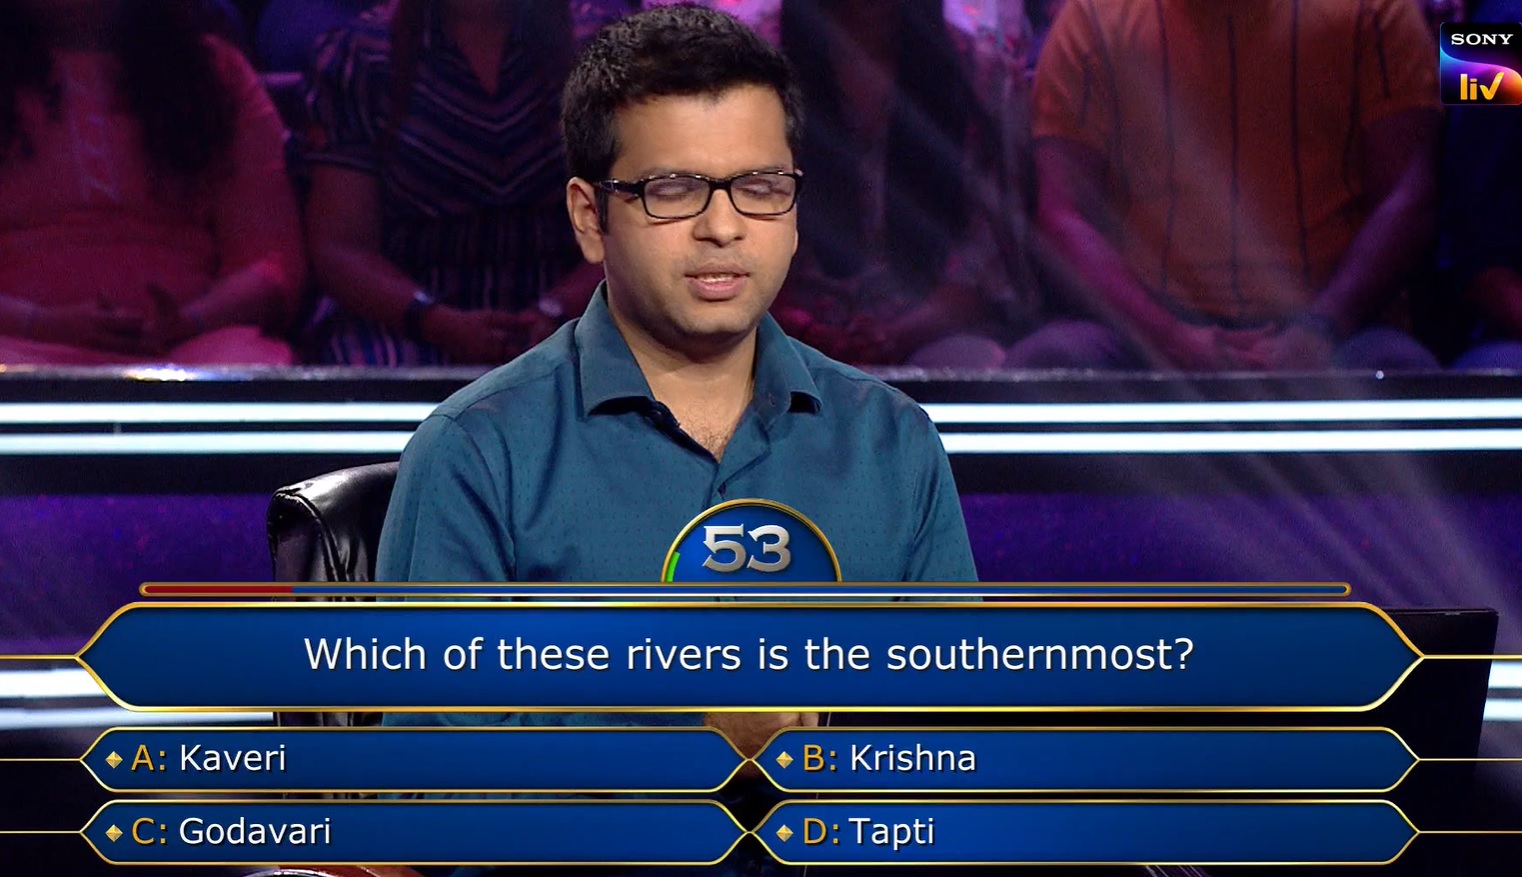 Ques : Which of these rivers is the southernmost?